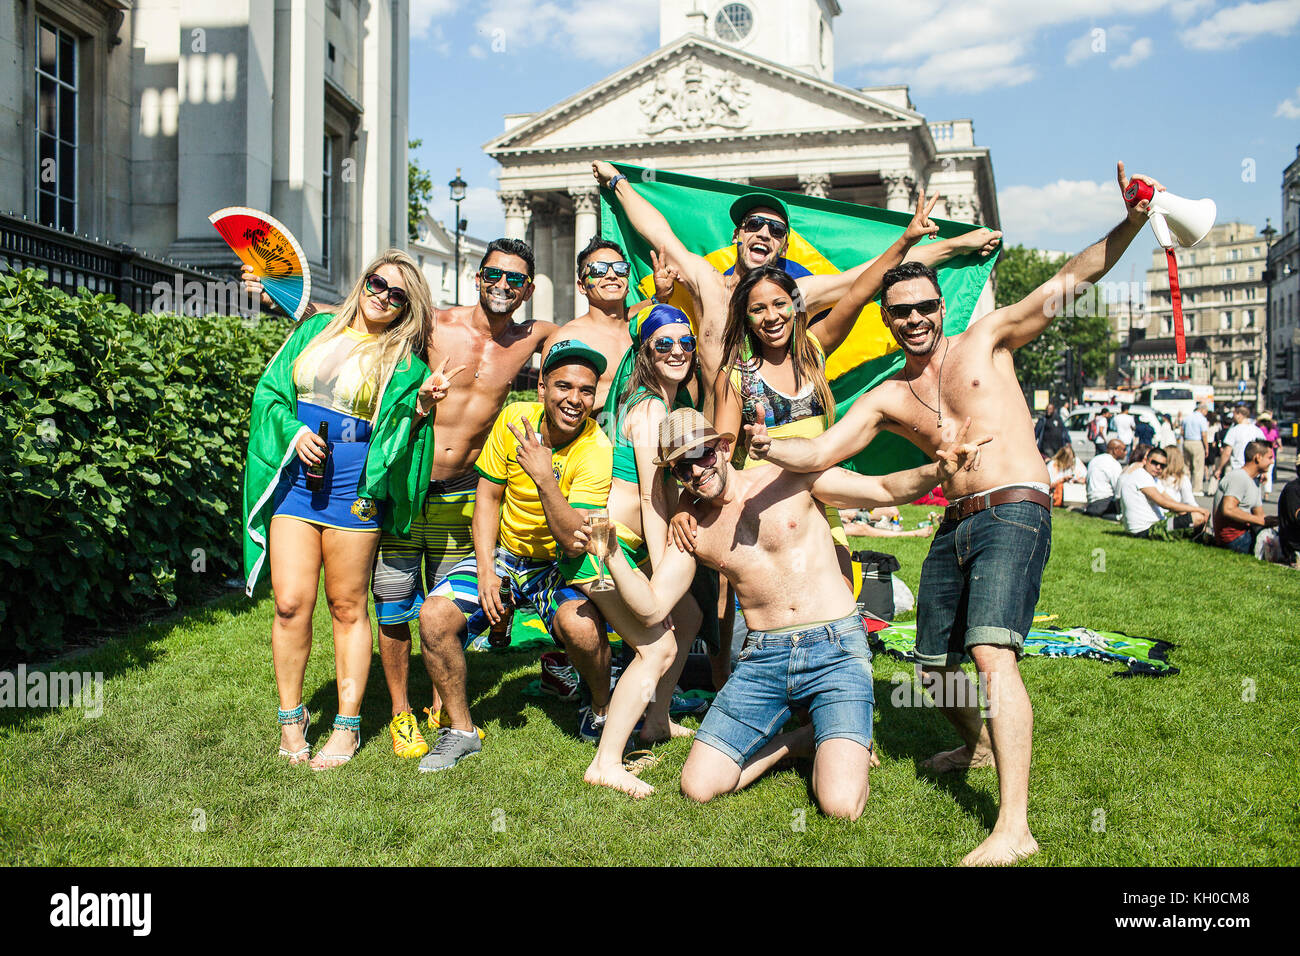 People from the Brazilian community are having a great time attending the ’Brazil Day’ at Trafalgar Square where they warm up for tonigh’s game between Brazil and Croatia at the FIFA World Cup 2014. UK 12/06 2014. Stock Photo